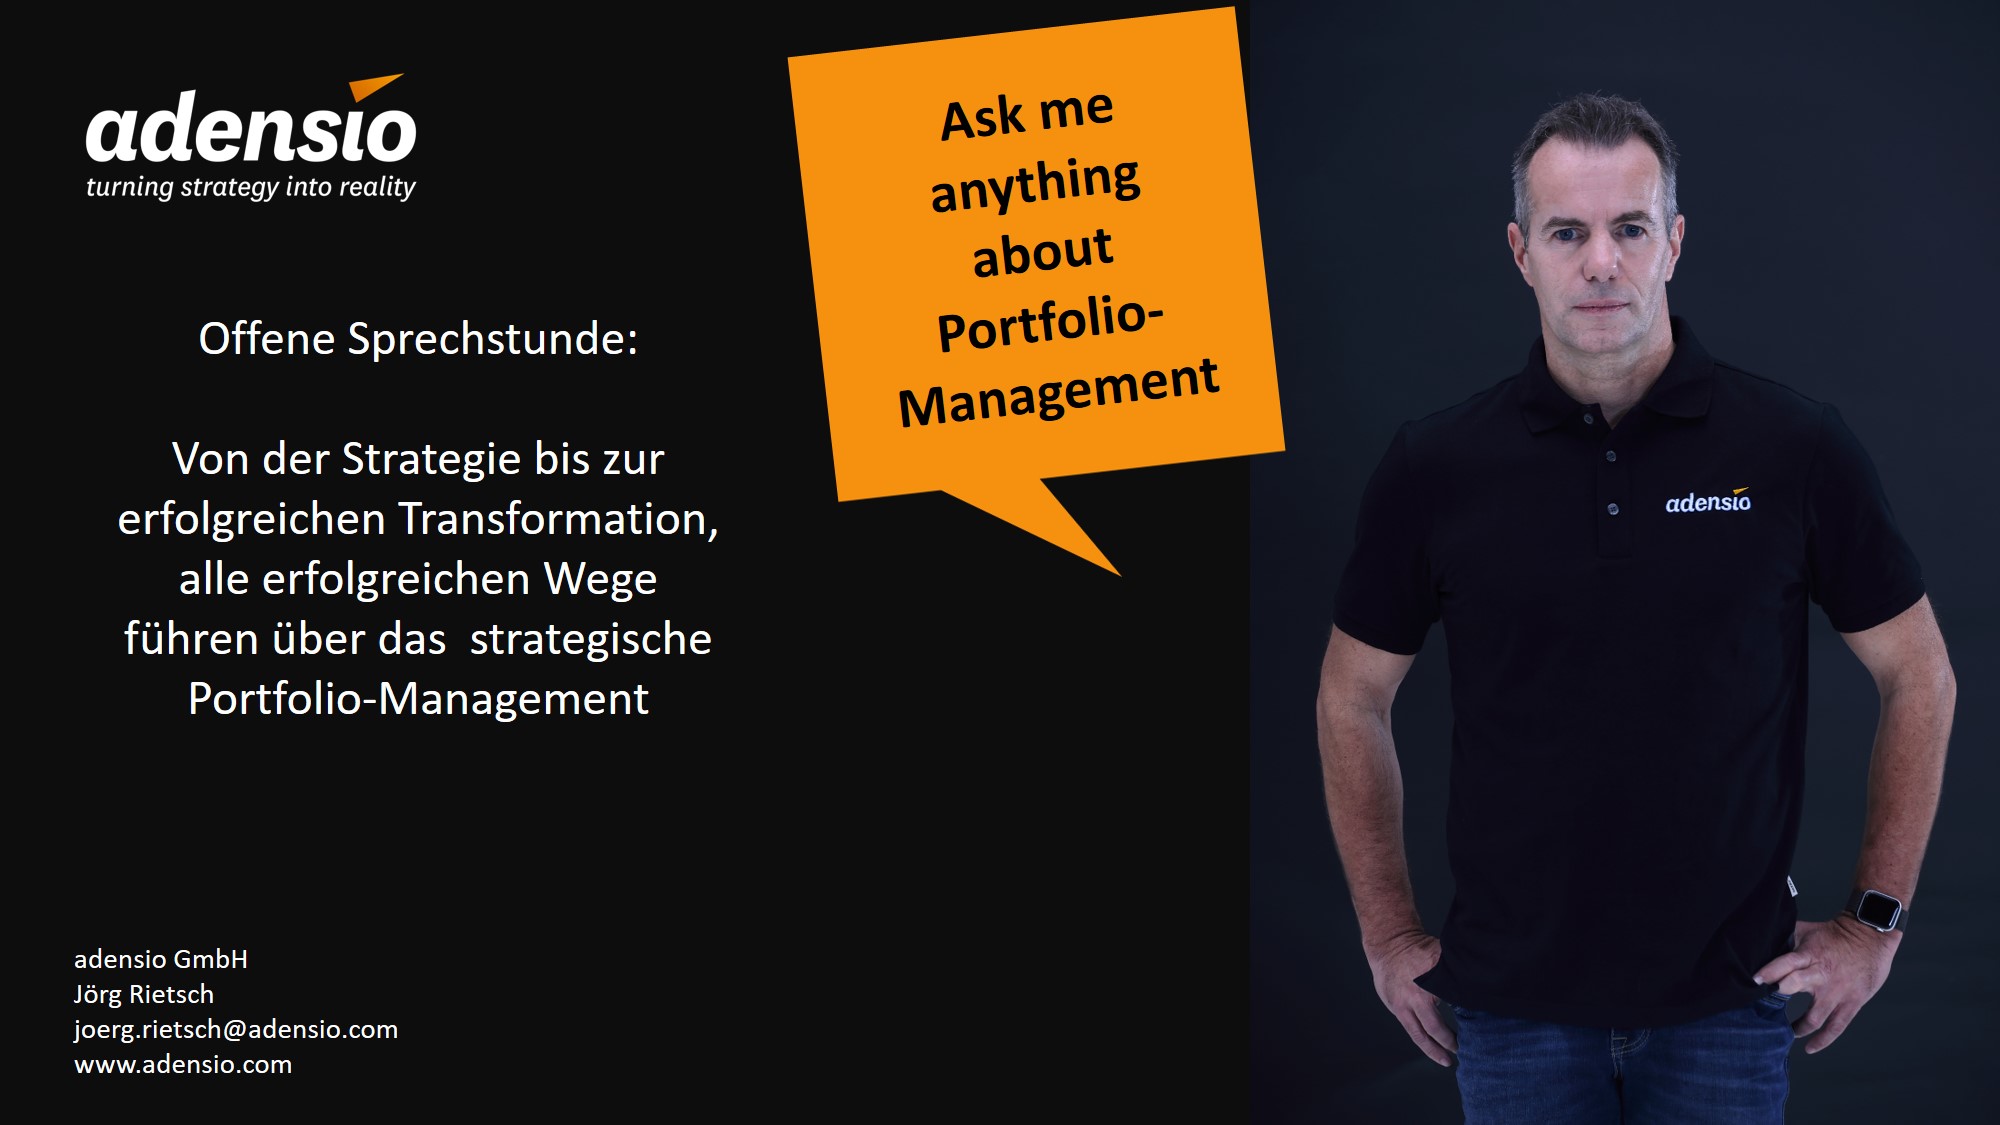 Ask me anything about Portfolio-Management!